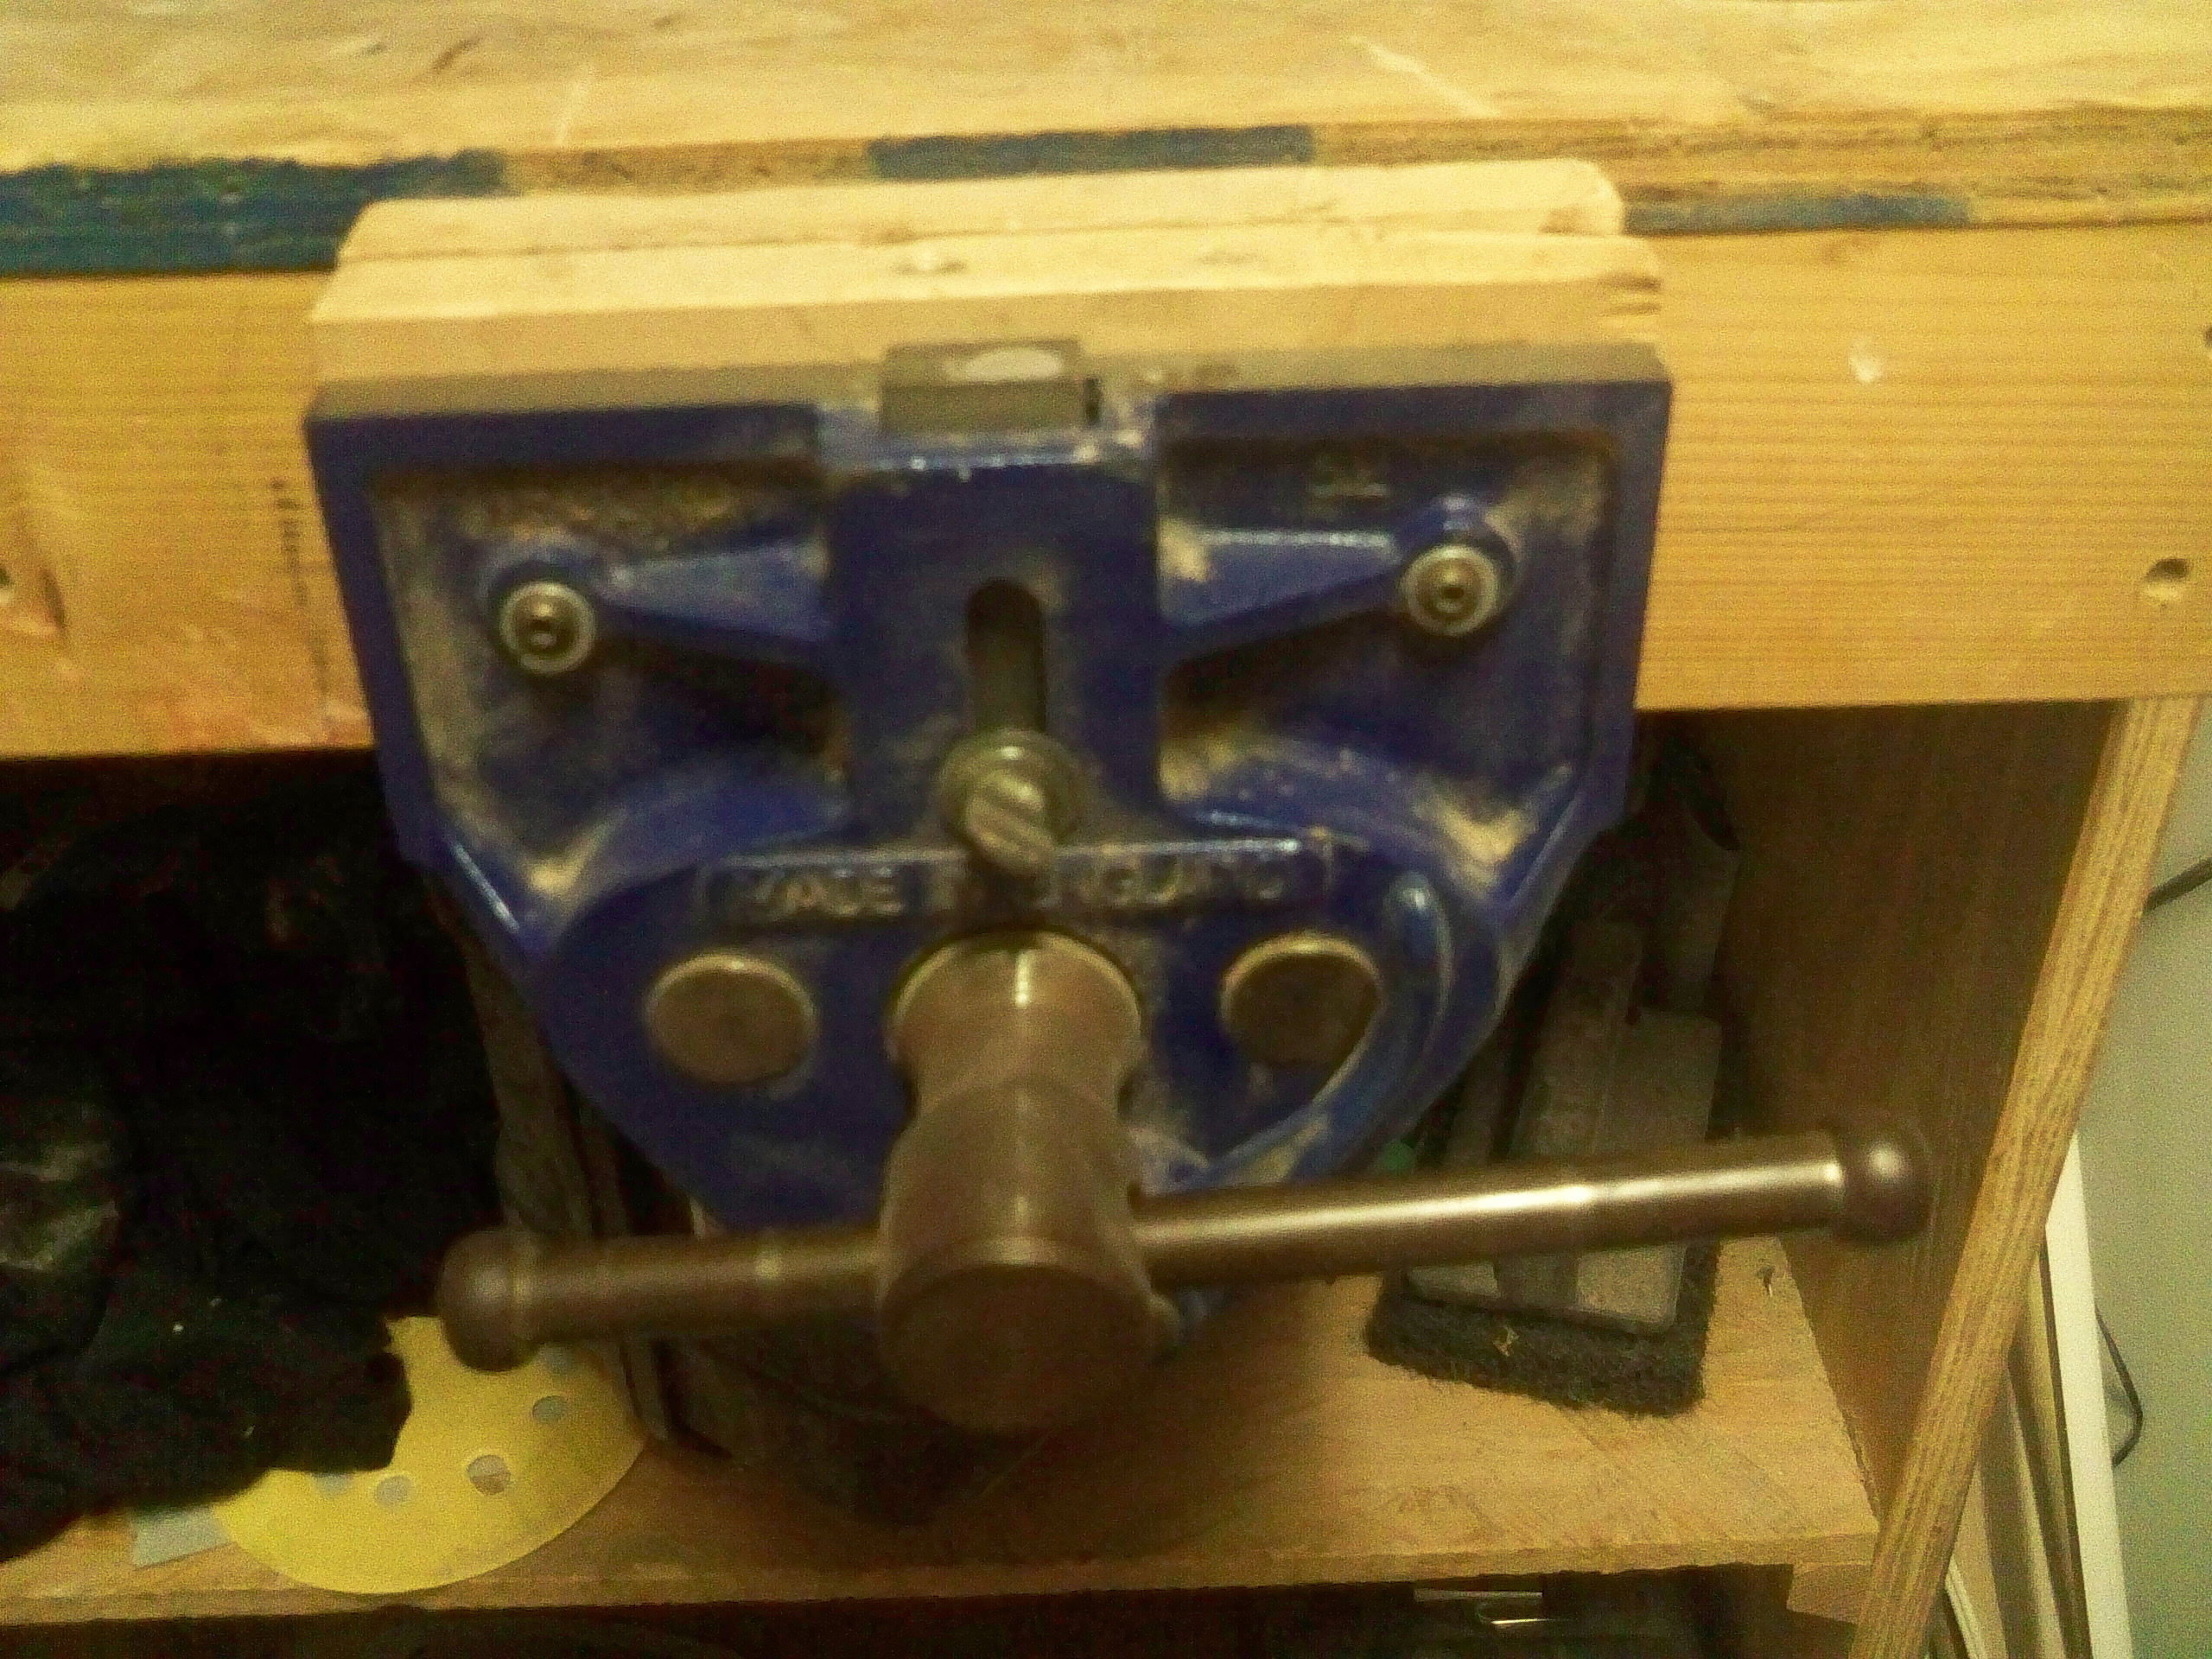 Wood Bench Vise At Harbor Freight - DIY Woodworking Projects